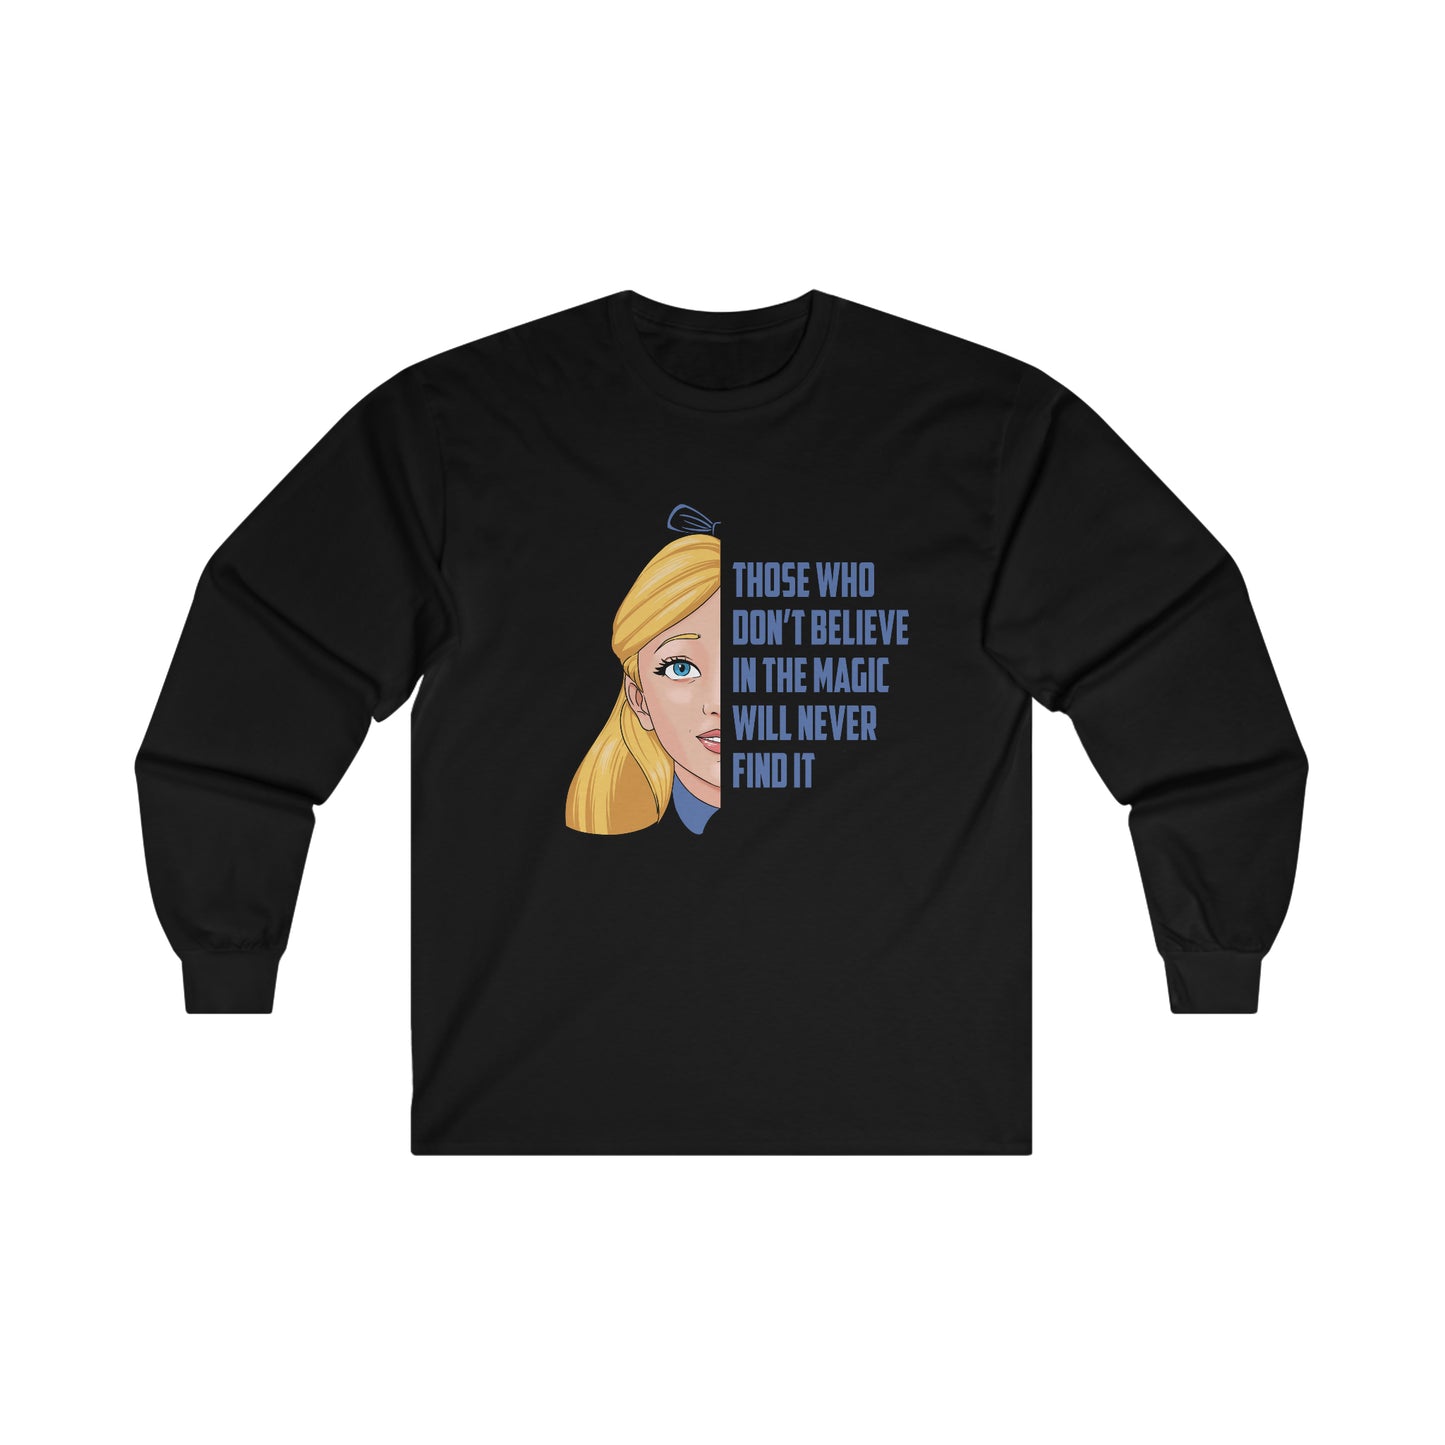 Alice in Wonderland Quote - Those Who Don't Believe in the Magic Will Never Find It Long Sleeve Shirt | Adult Unisex